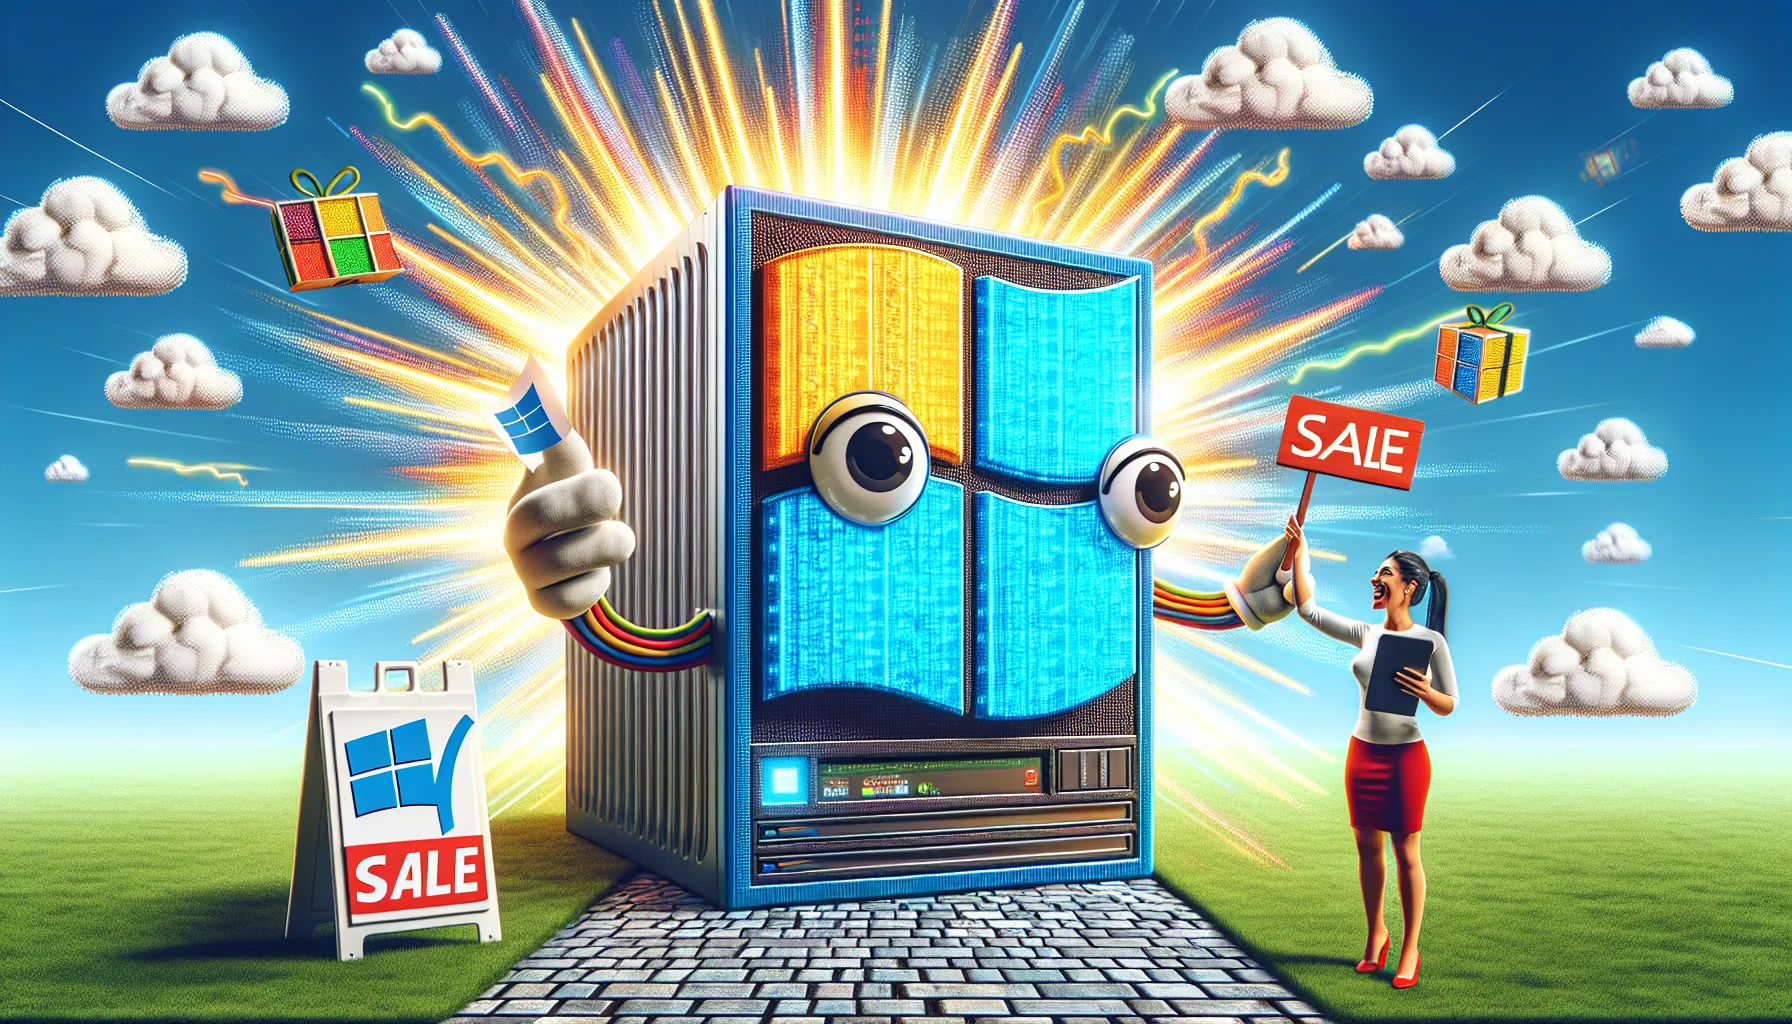 Generate an amusing and enticing image for Cheap Windows Web Hosting. The image includes a large, welcoming, cartoon-style web server, painted with a window logo, coming to life. The server, with wide friendly eyes and cord-like arms, is placing a 'Sale' placard out front on a pixelated lawn. On the side, a South Asian woman holding a tablet high-fives the web server, her face filled with delight. Bright rays of digital data stream from behind the animated server, indicating unending seamless service. The background comprises a backdrop of whimsical data clouds, enhancing the light-hearted tone of the image.